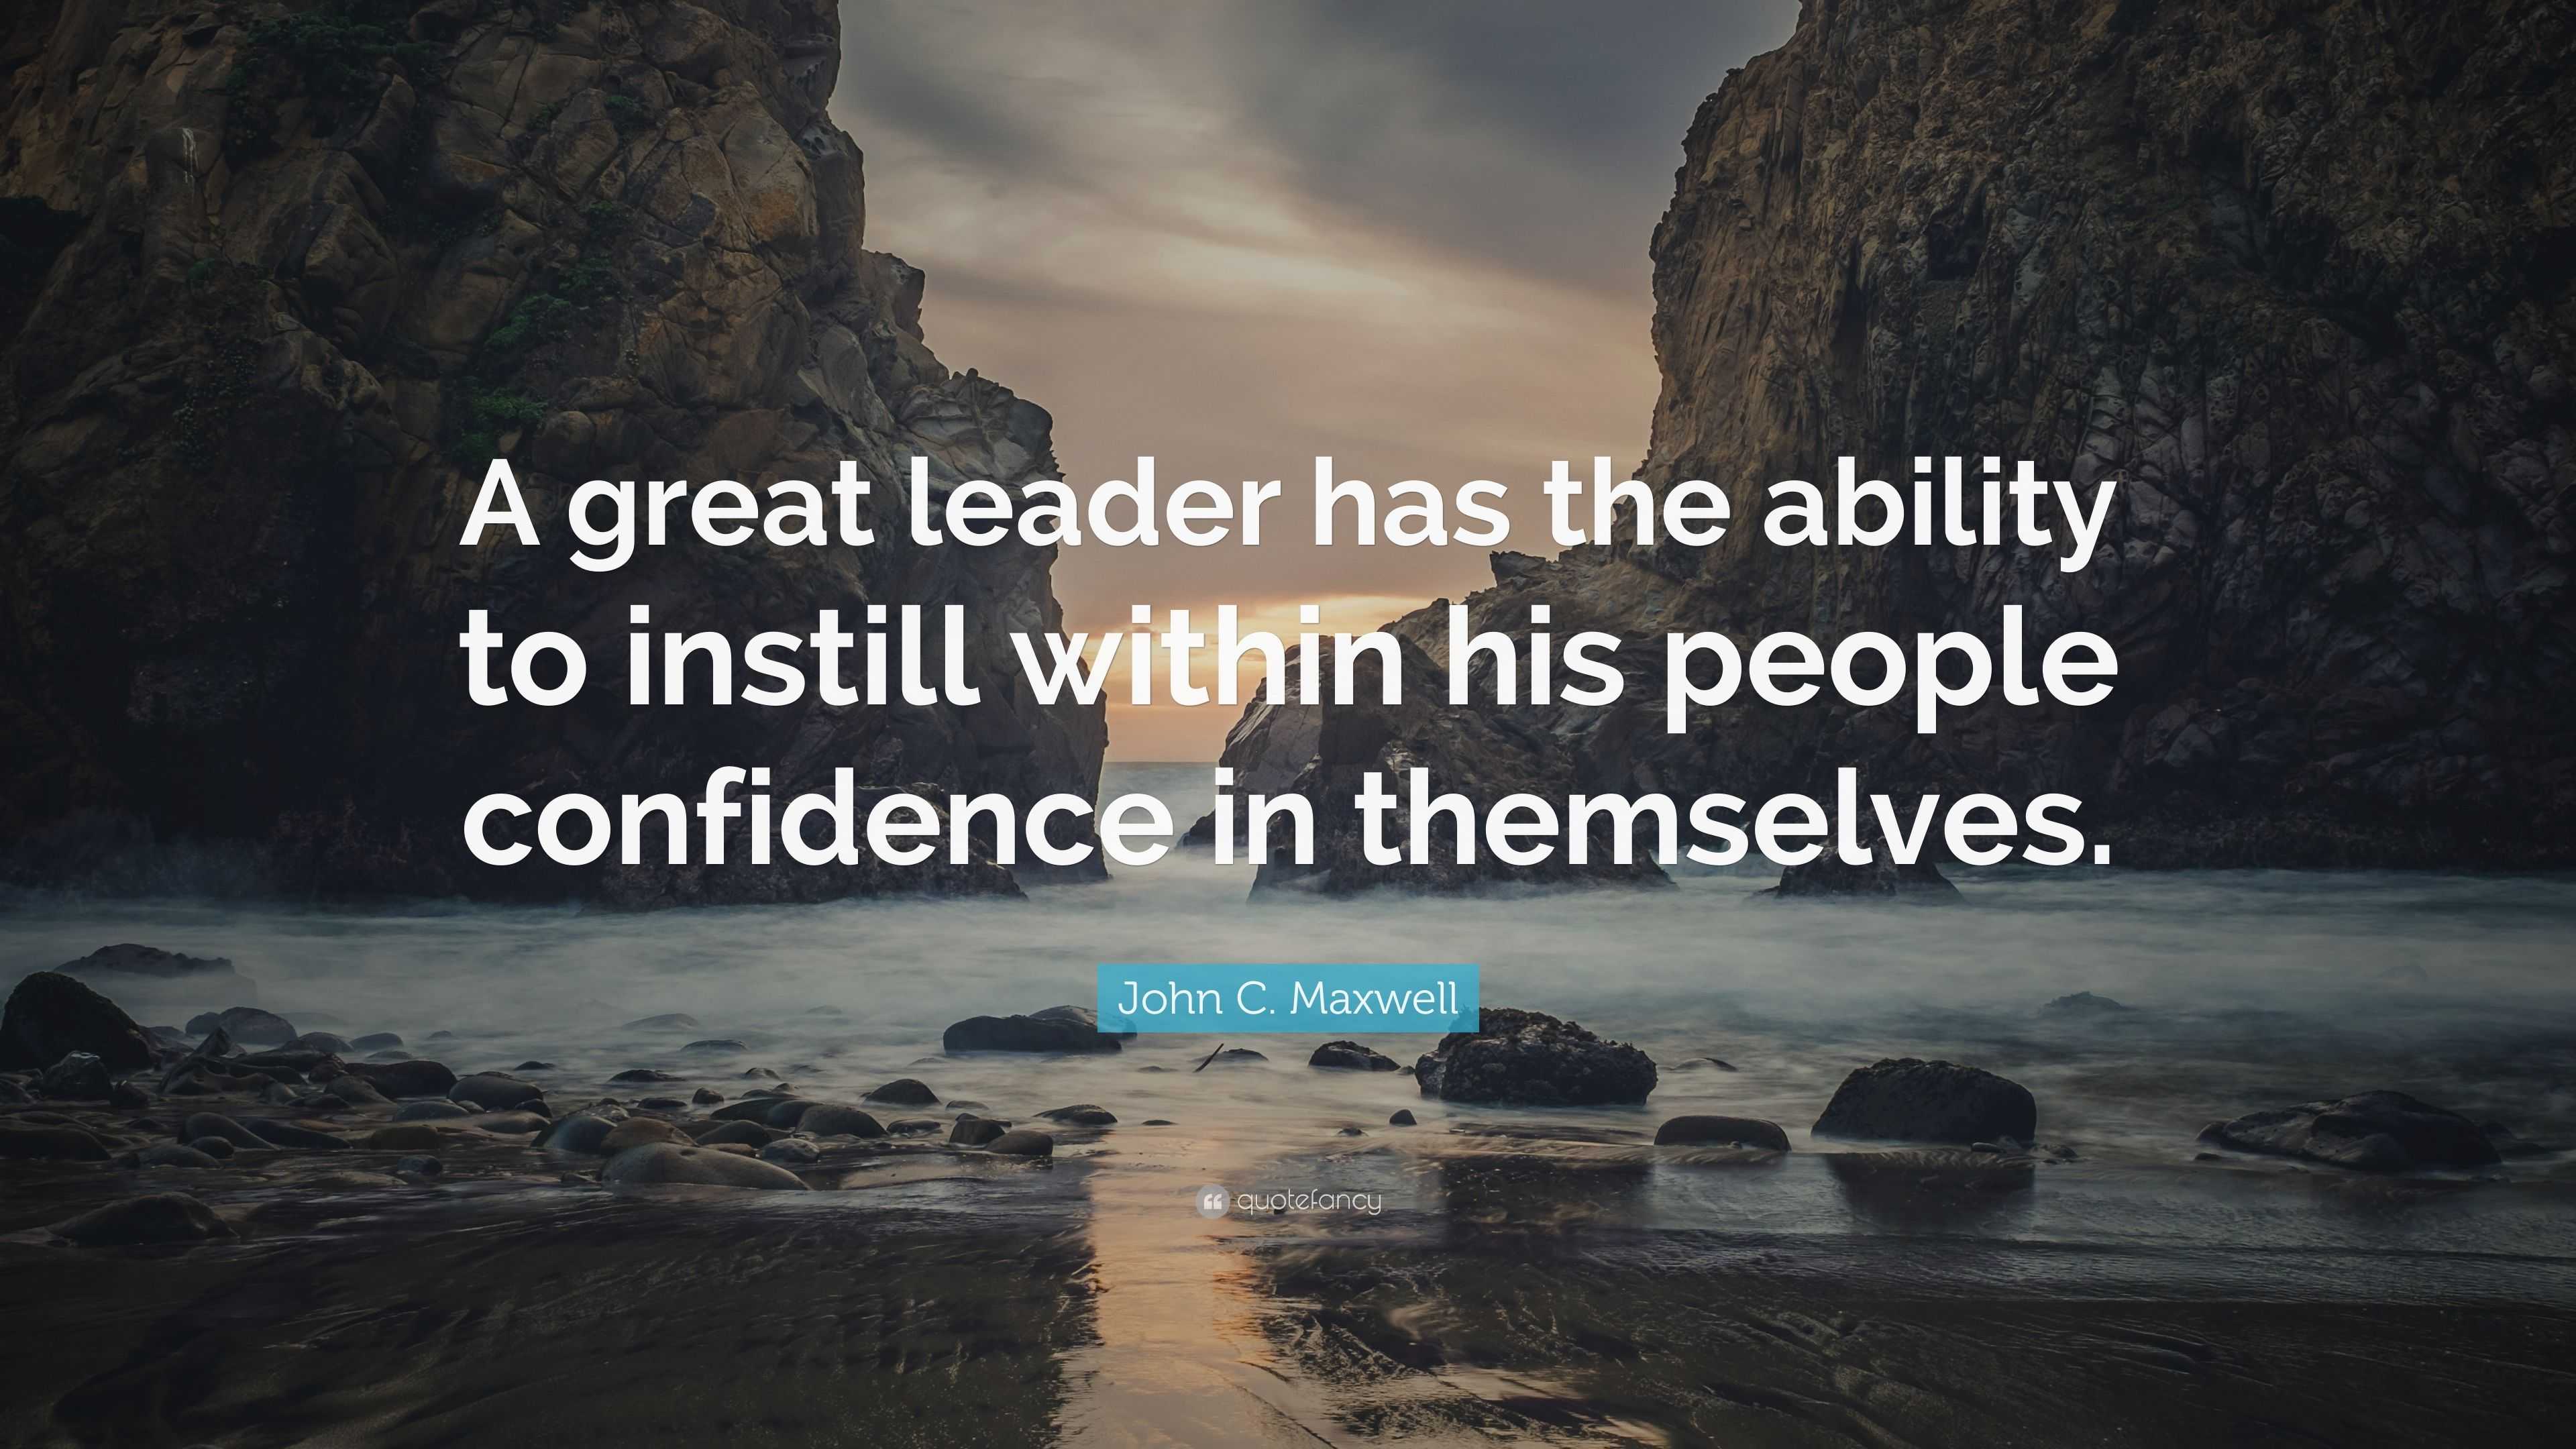 John C. Maxwell Quote: “A great leader has the ability to instill